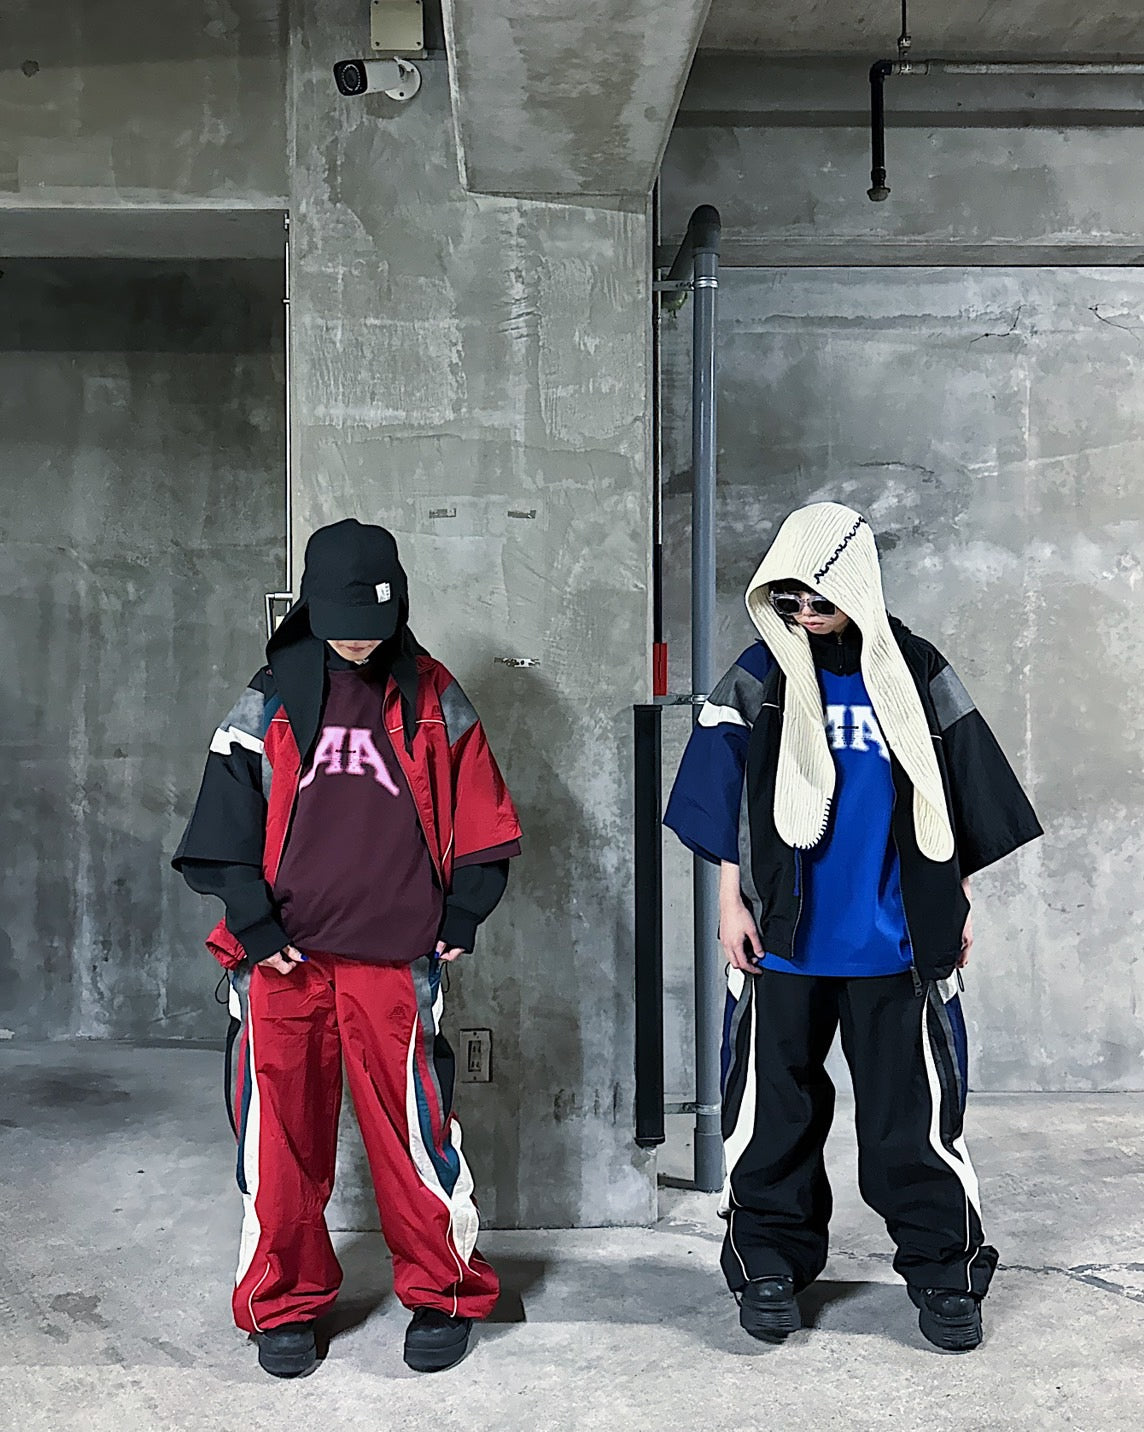 【ADER ERROR】<br> New items from the 24SS collection "MULTI-SENSORY" are now on sale!